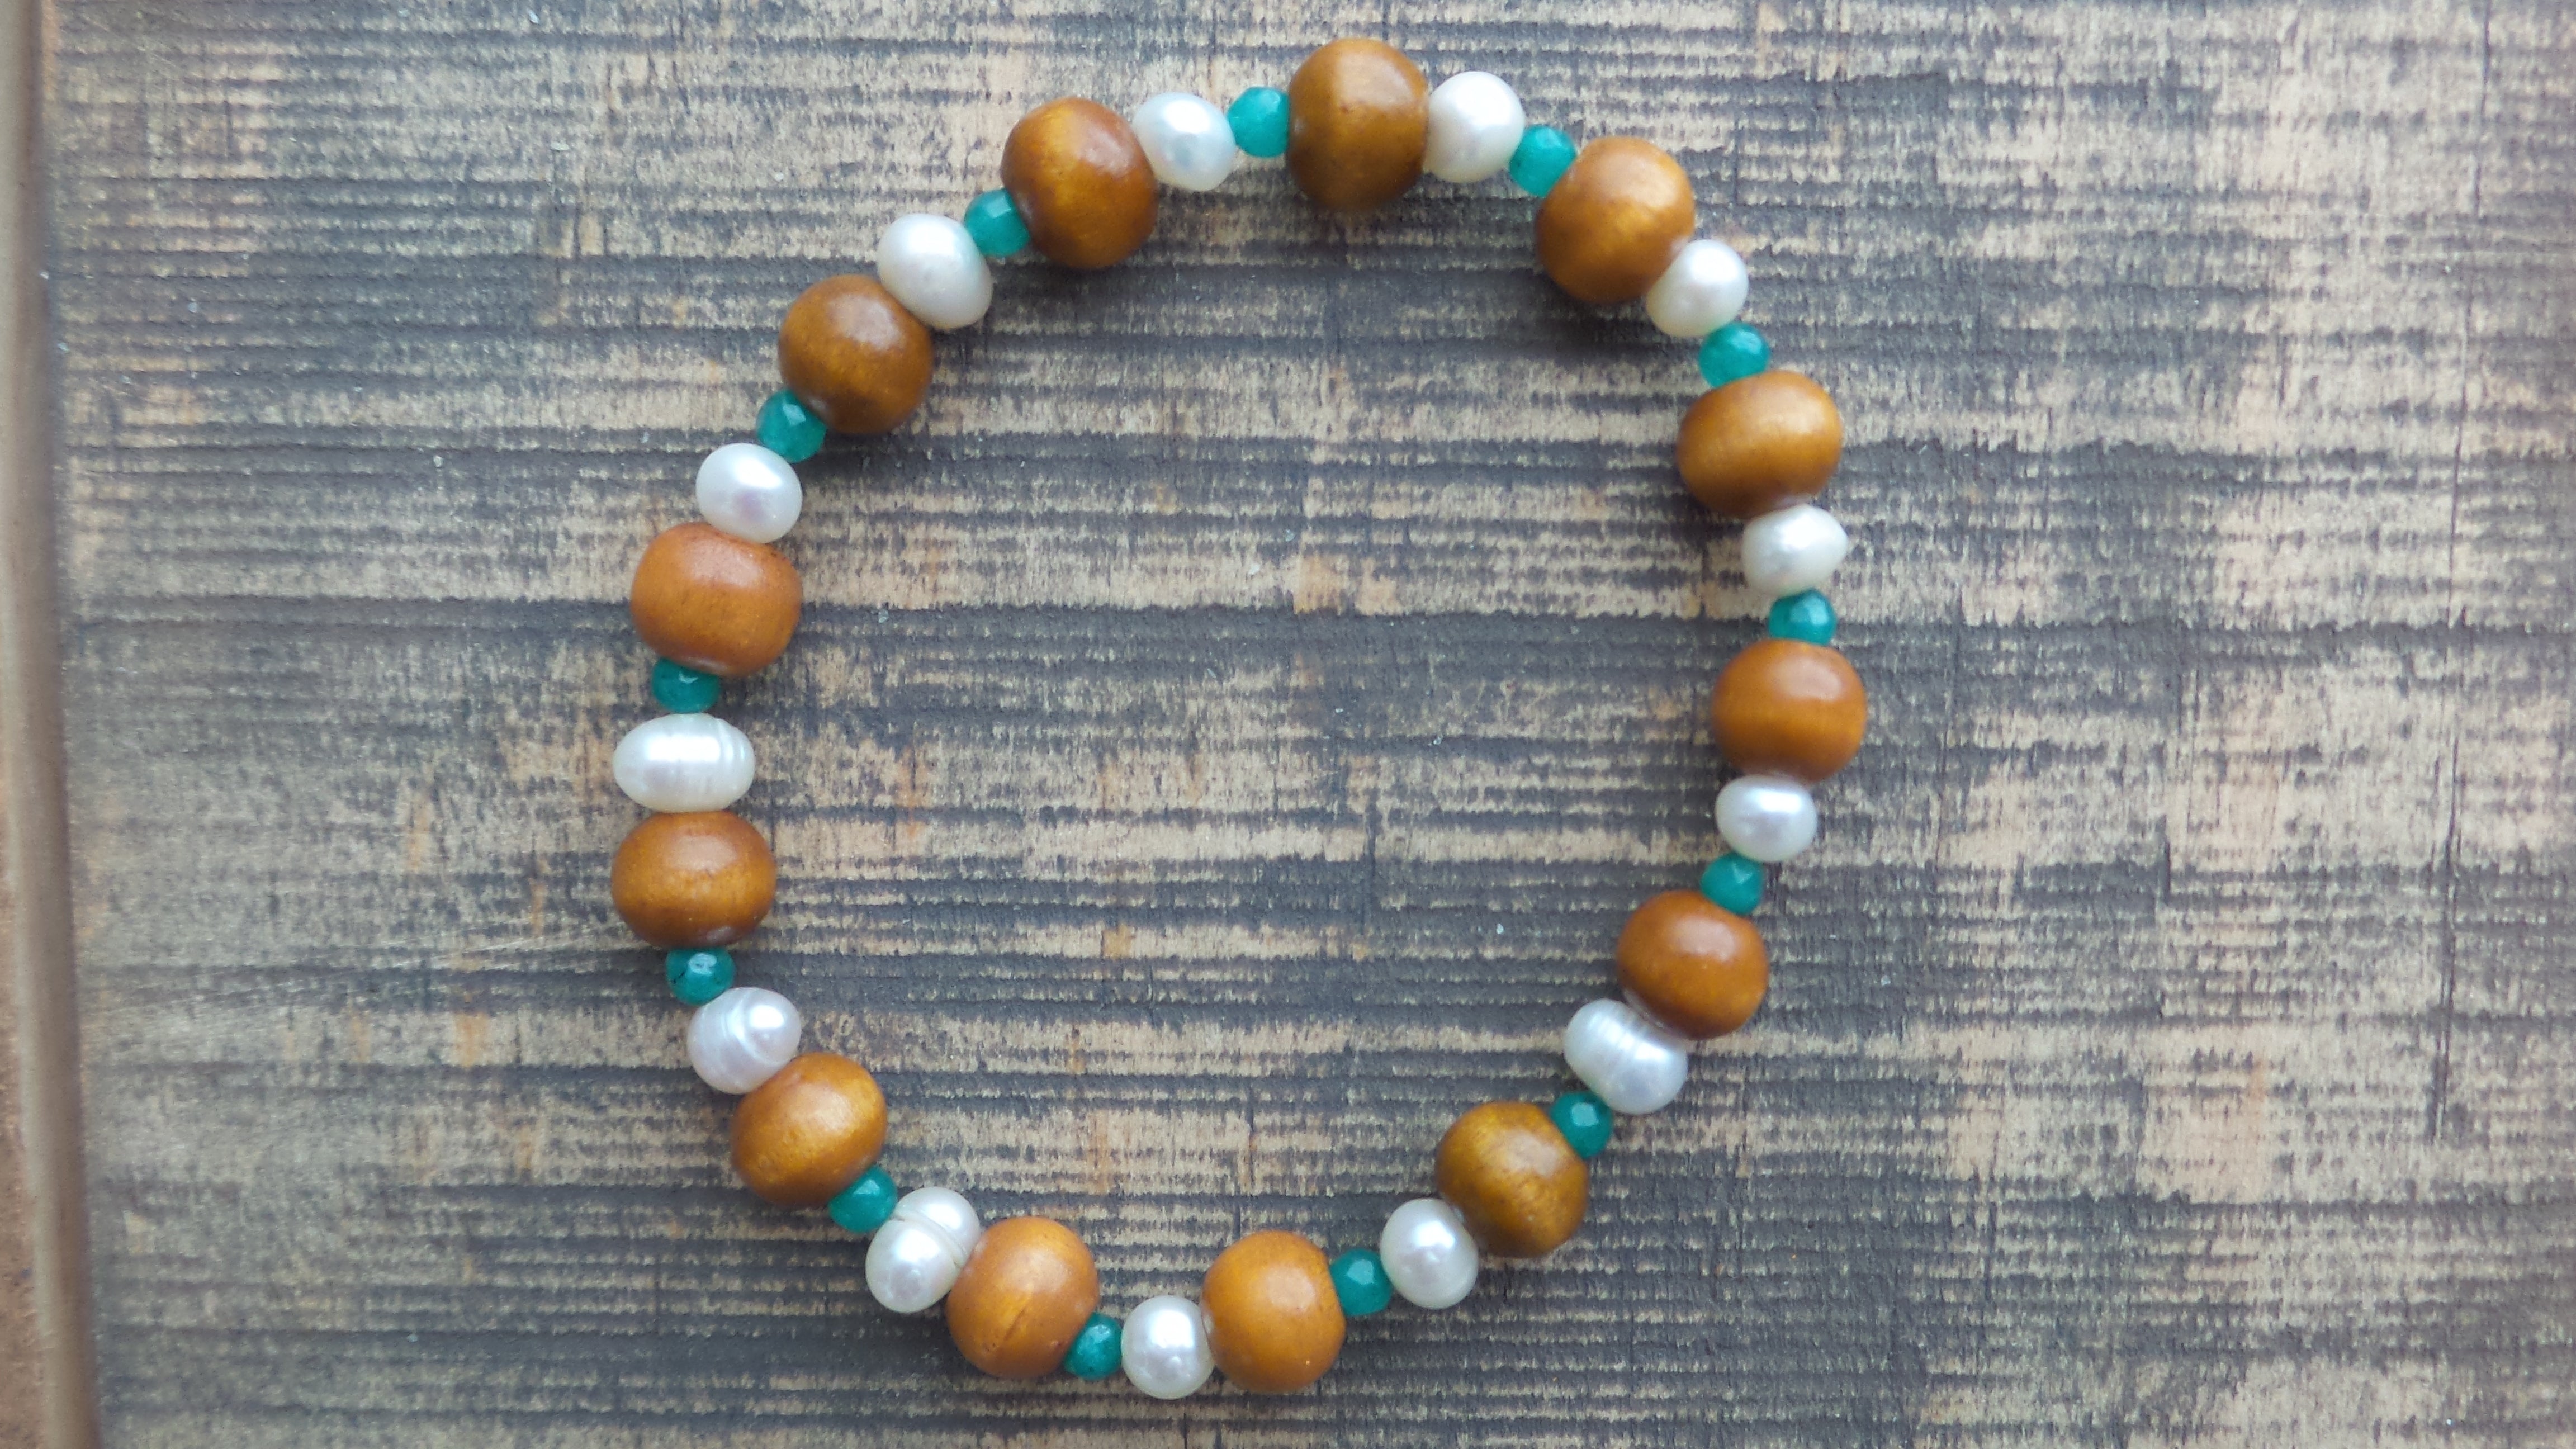 Bracelet- Wood with Freshwater Pearls and Teal Agate